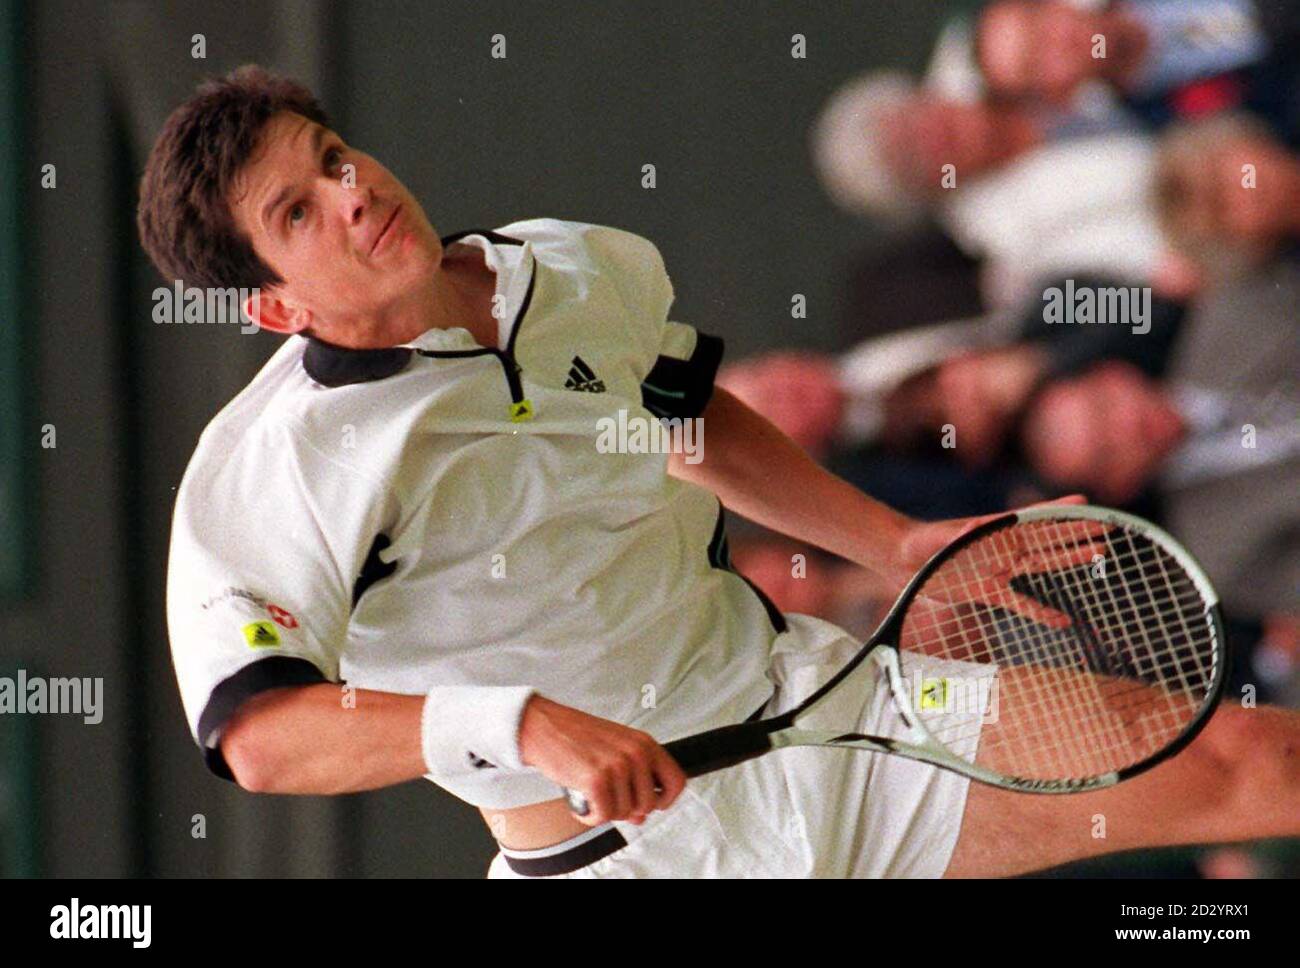 Britain's No.2 Tim Henman on Centre Court in a match against Byron Black of  Zimbabwe, in the Wimbledon Championships today (Friday). Photo by Fiona  Hanson/PA Stock Photo - Alamy